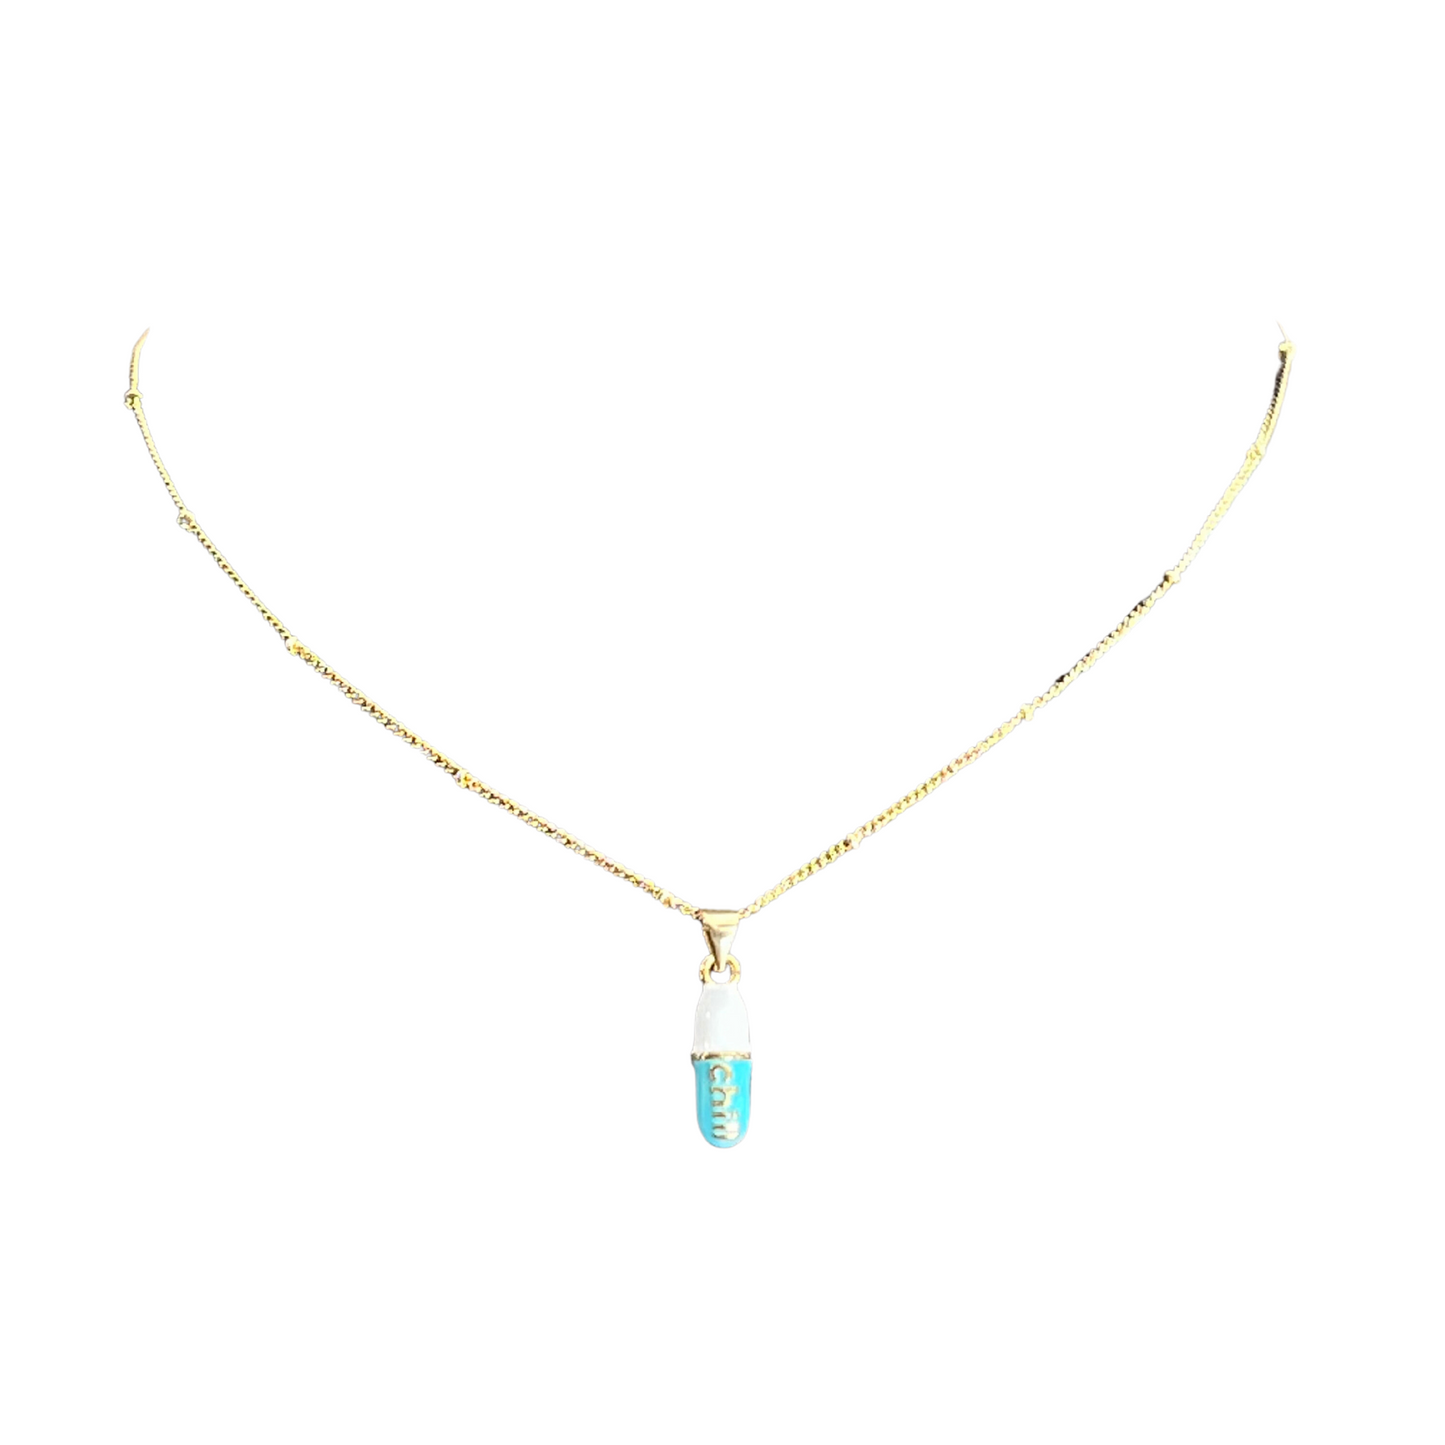 Chill Pill necklace in blue